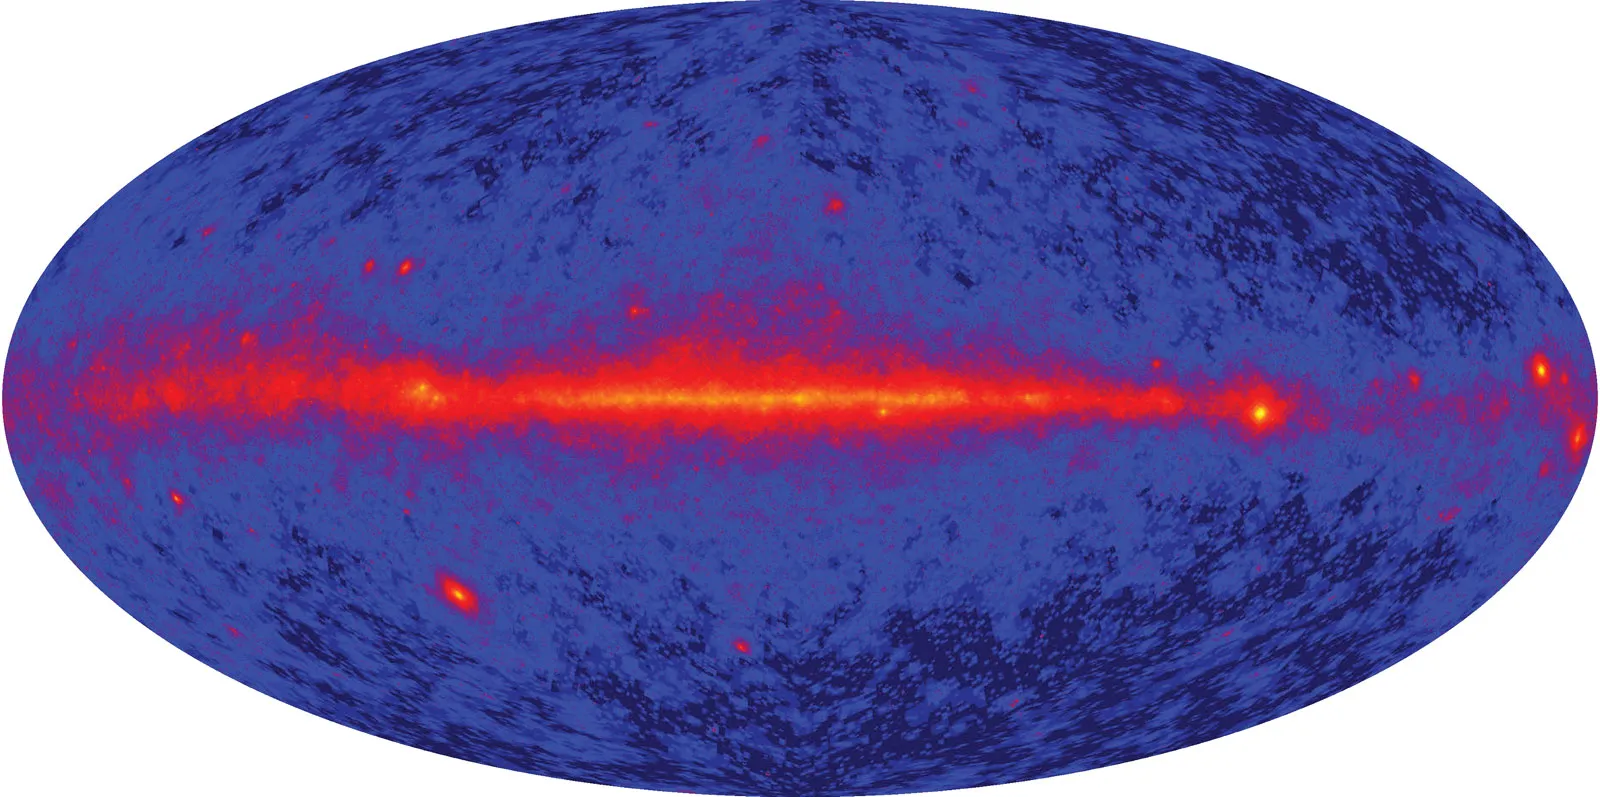 11-surprising-facts-about-gamma-ray-observations-e-g-fermi-lat-magic